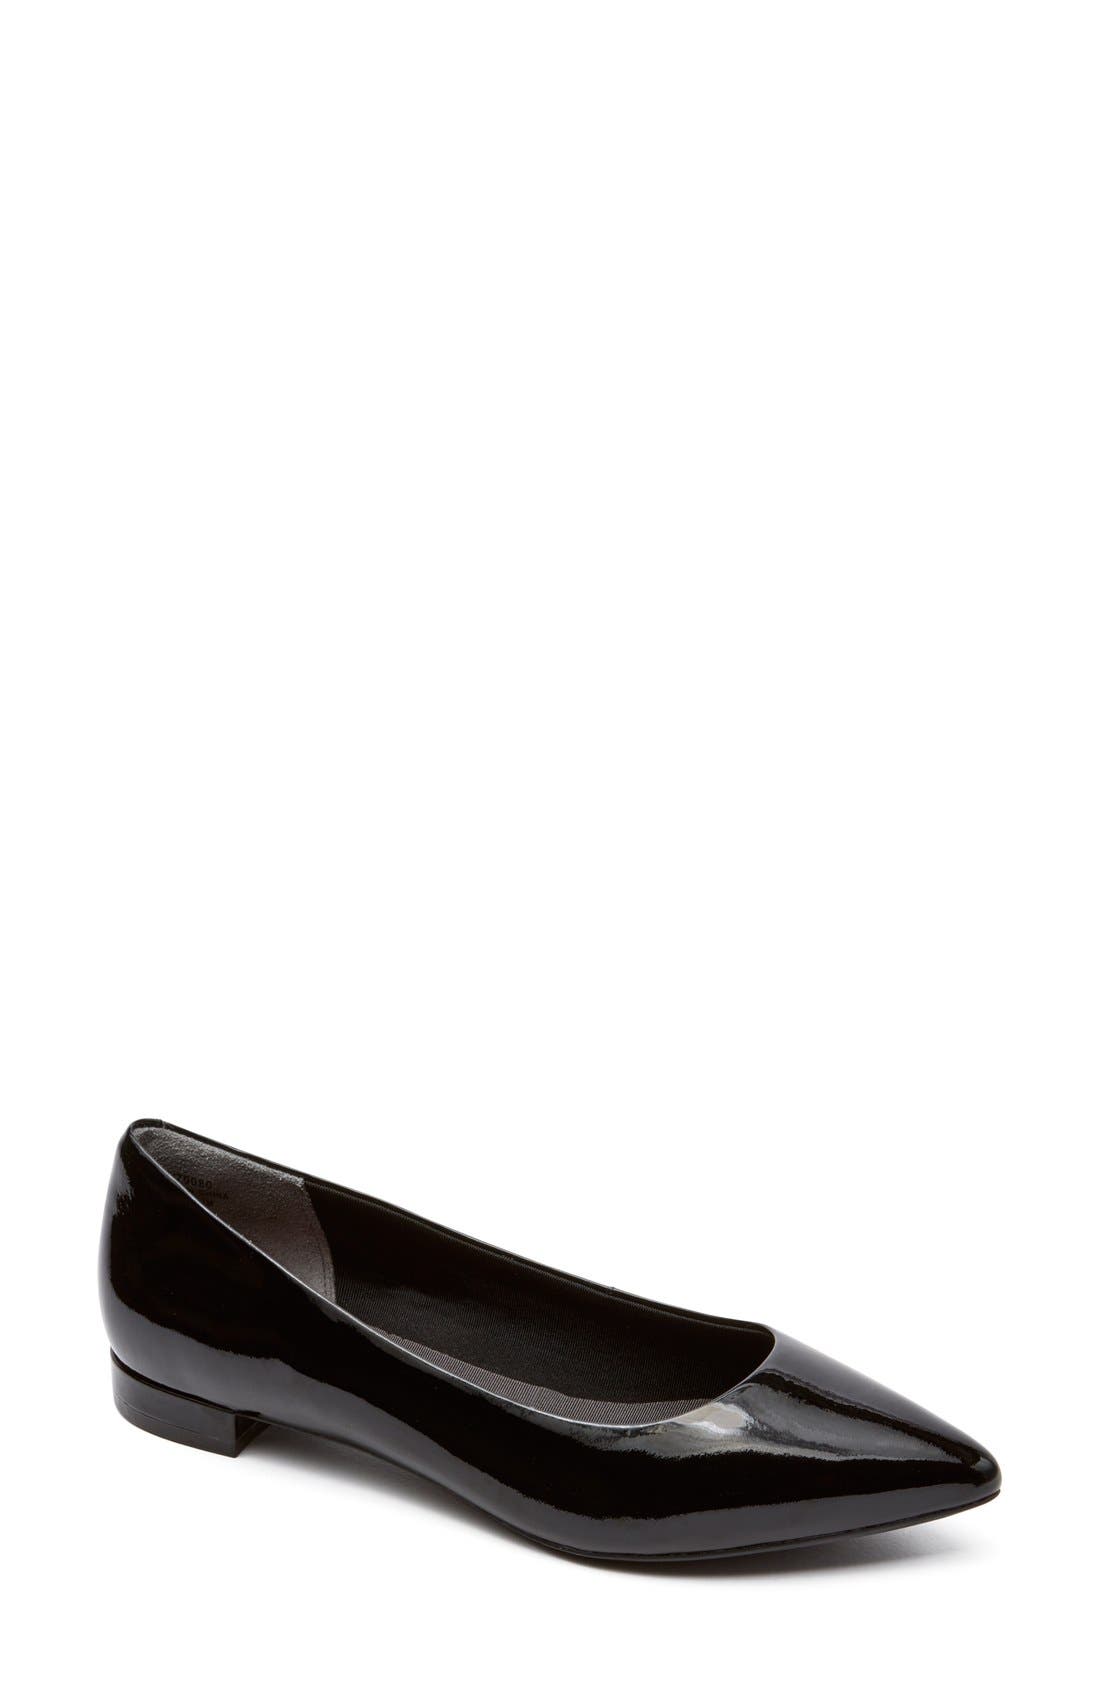 Rockport Pointed Toe Flats | Nordstrom